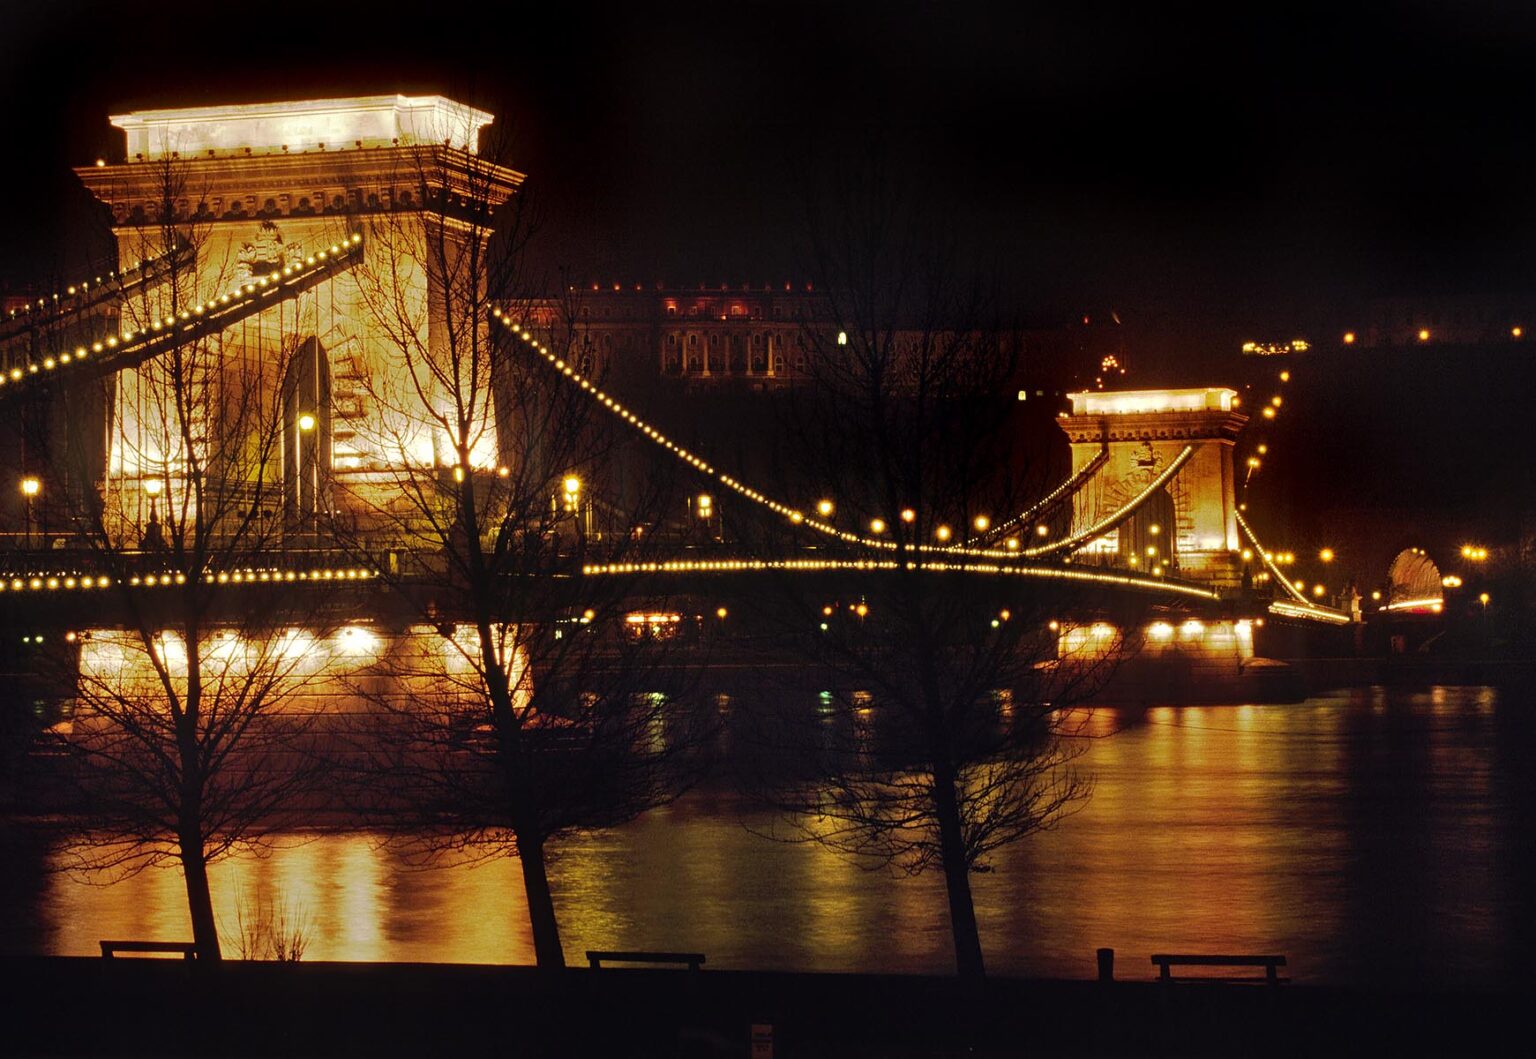 Night shot of the CHAIN BRIDGE completed in 1849 (first bridge to connect Buda to Pest) - BUDAPEST